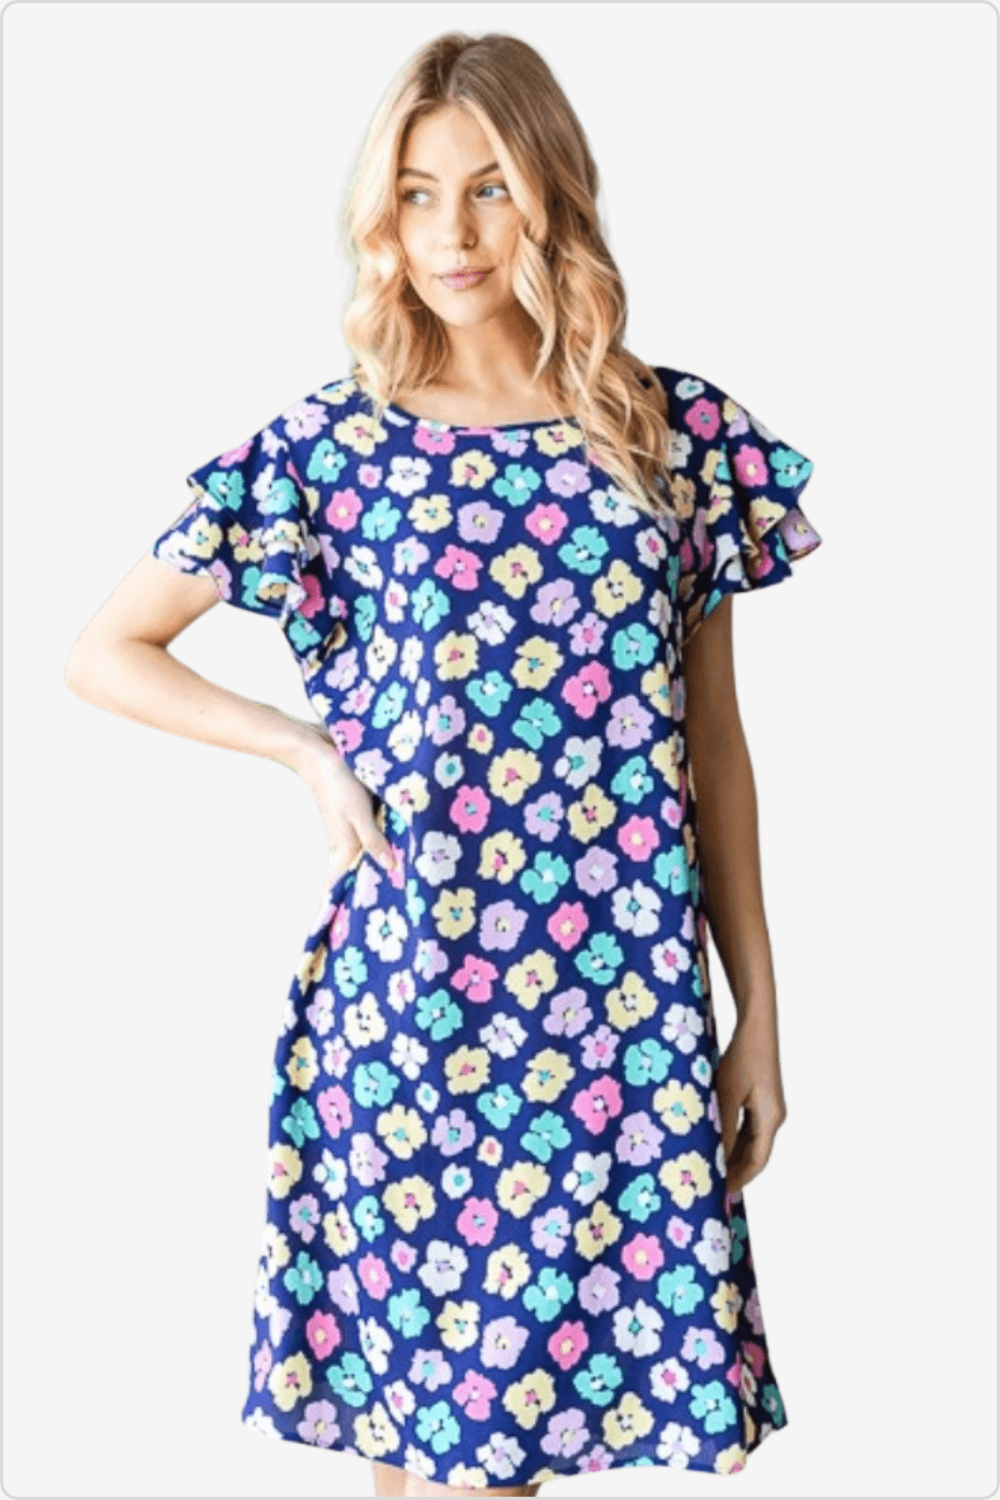 Fashionable short dress with bright multicolor floral pattern modeled by a woman with wavy blonde hair.